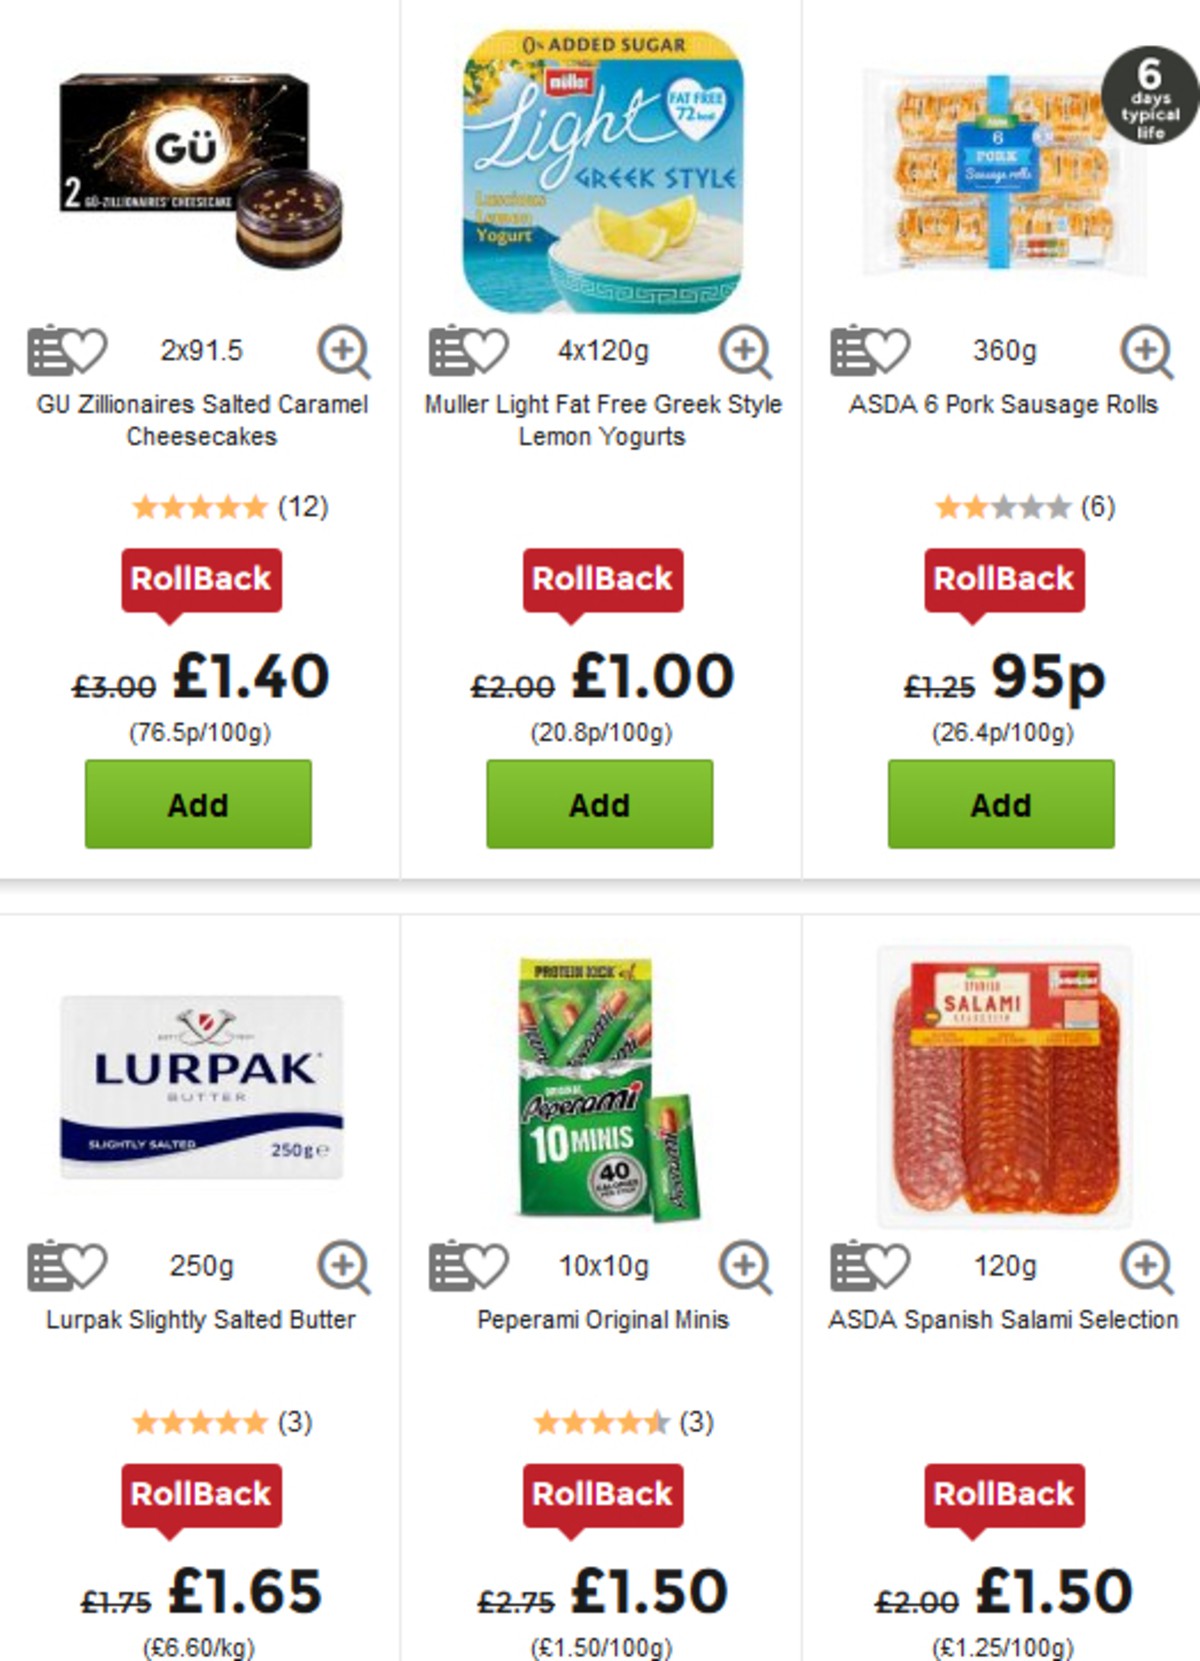 ASDA Offers from 5 April